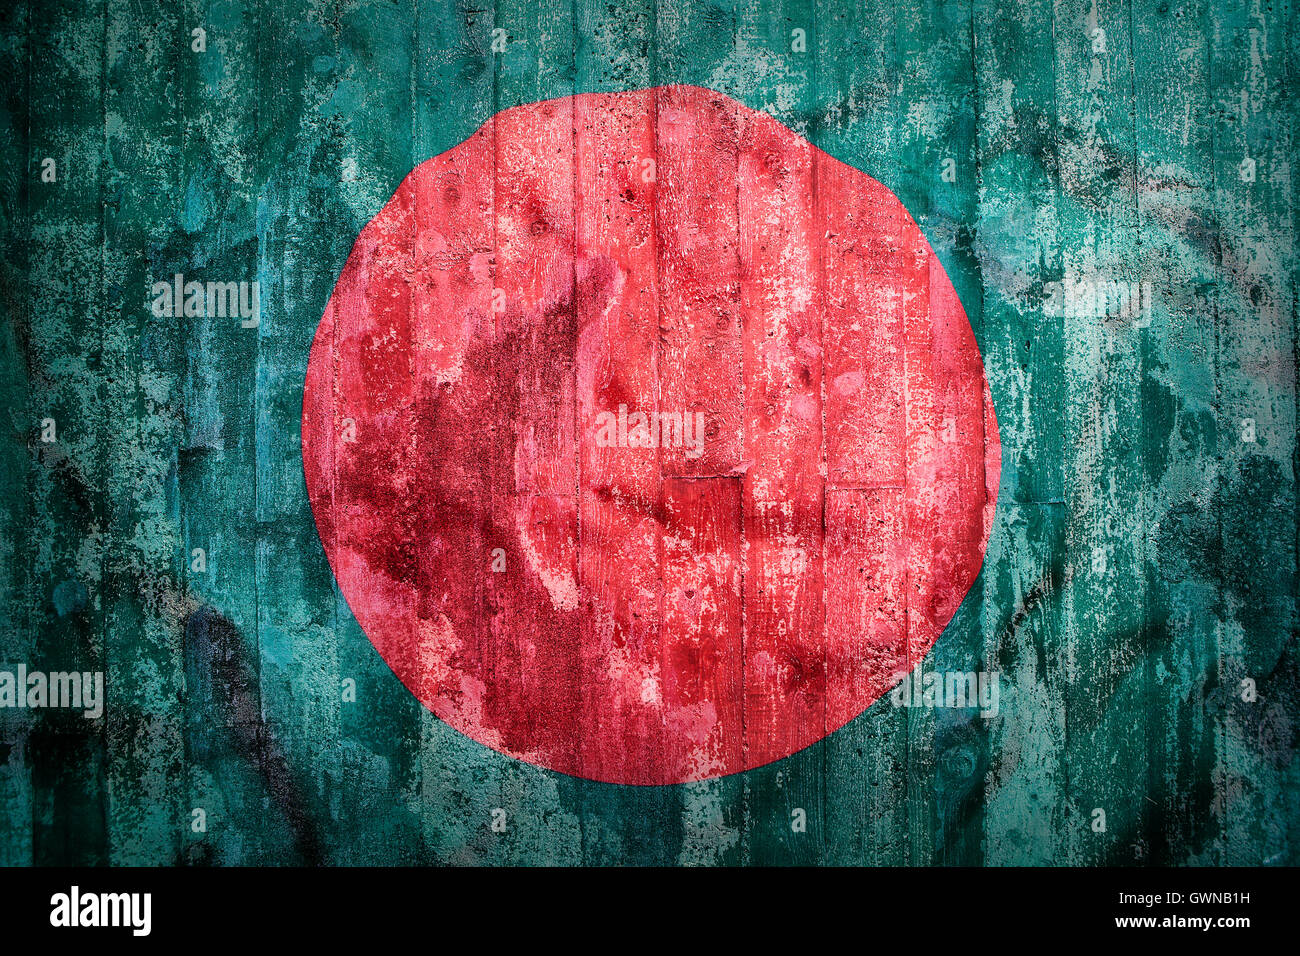 Grunge style of Bangladesh flag on a brick wall for background Stock